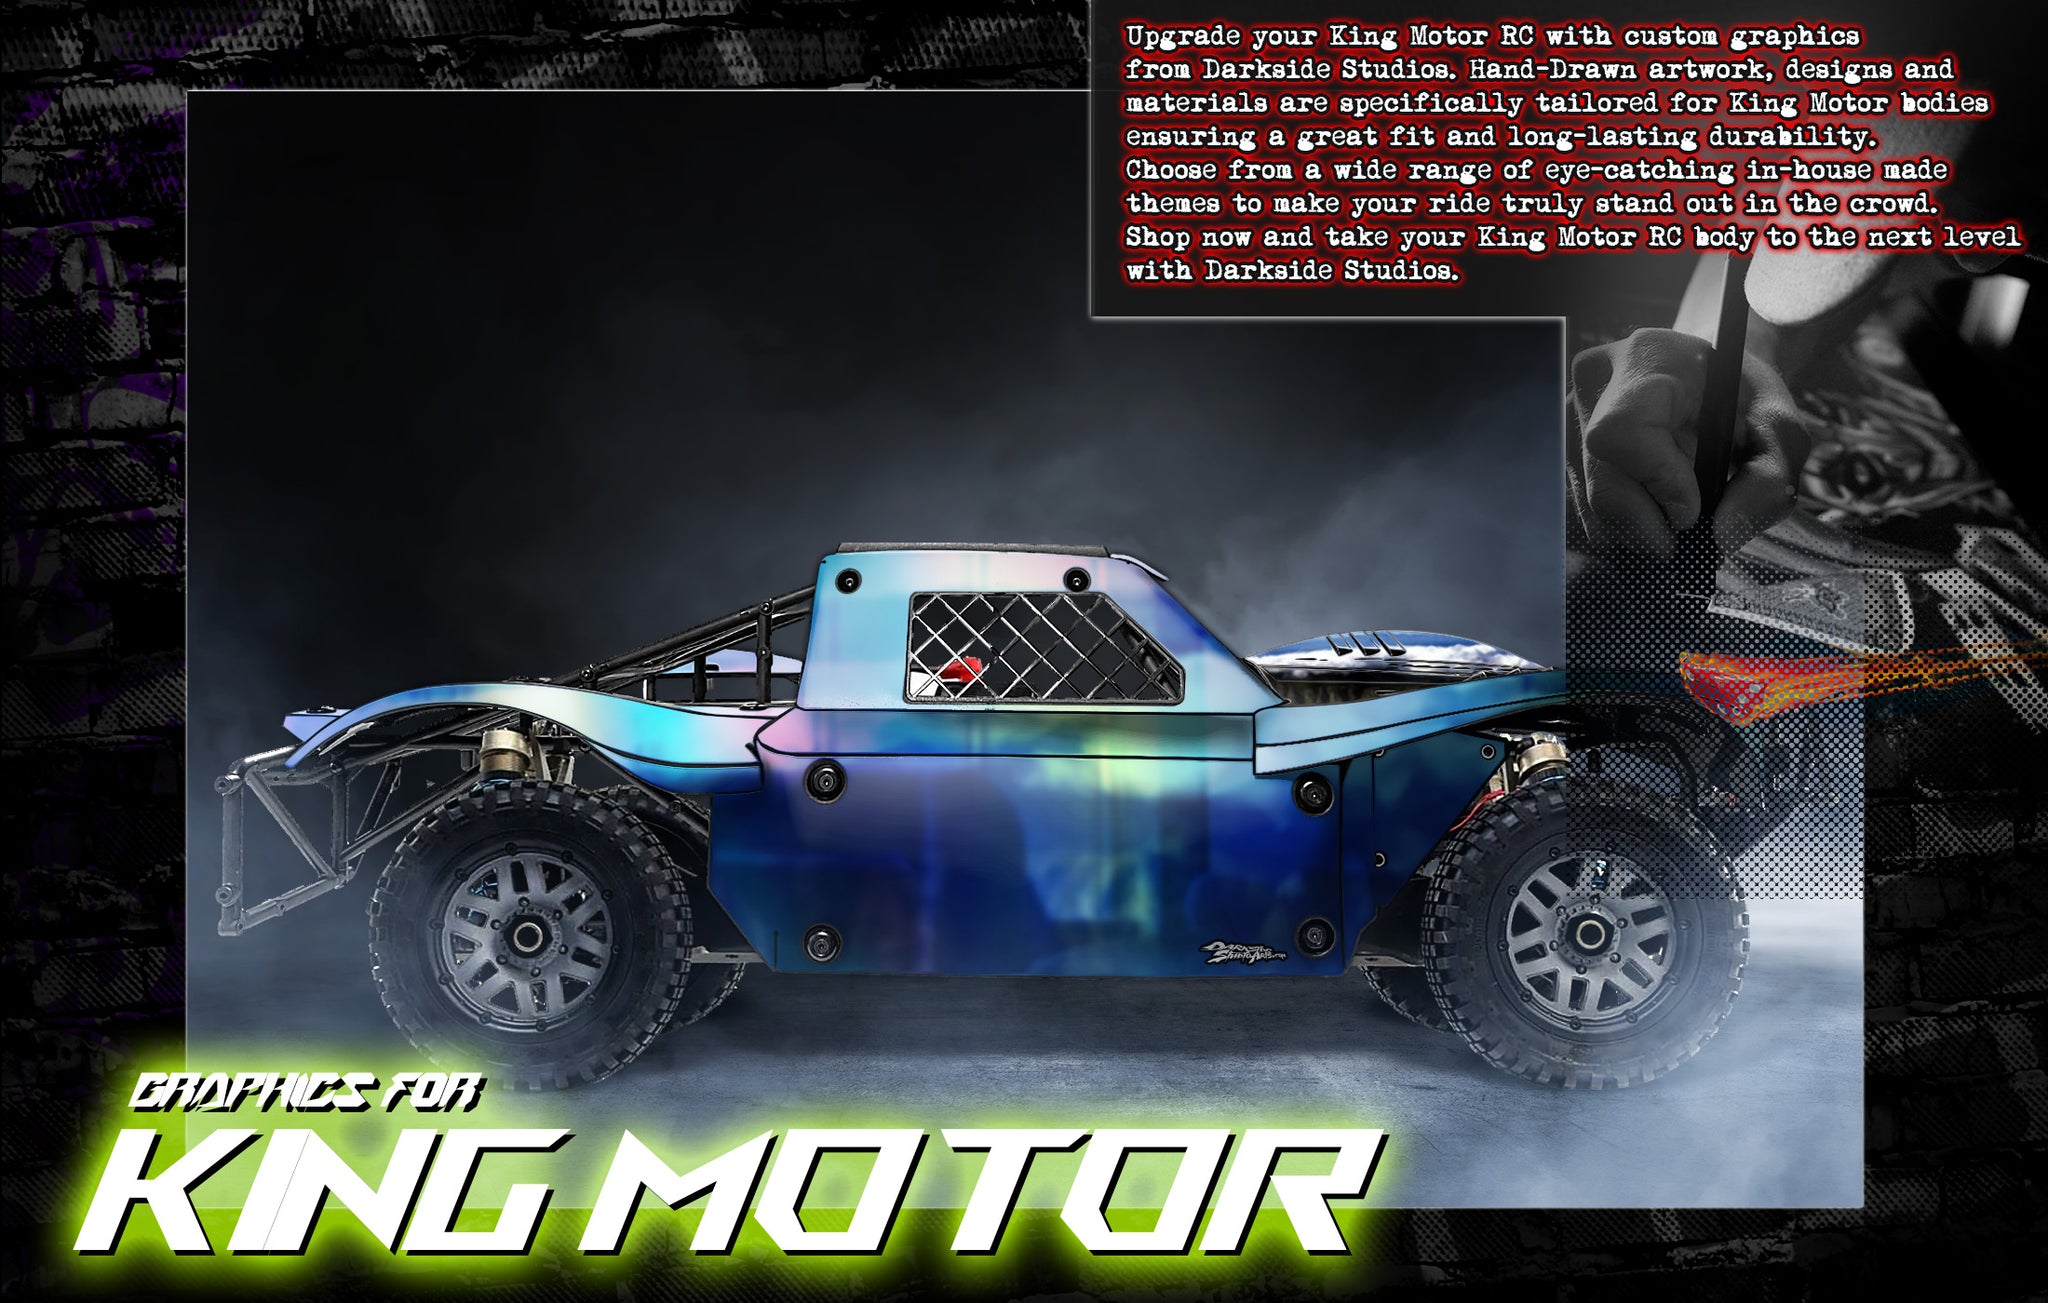 Upgrade your King Motor RC look with custom graphics from Darkside Studios.